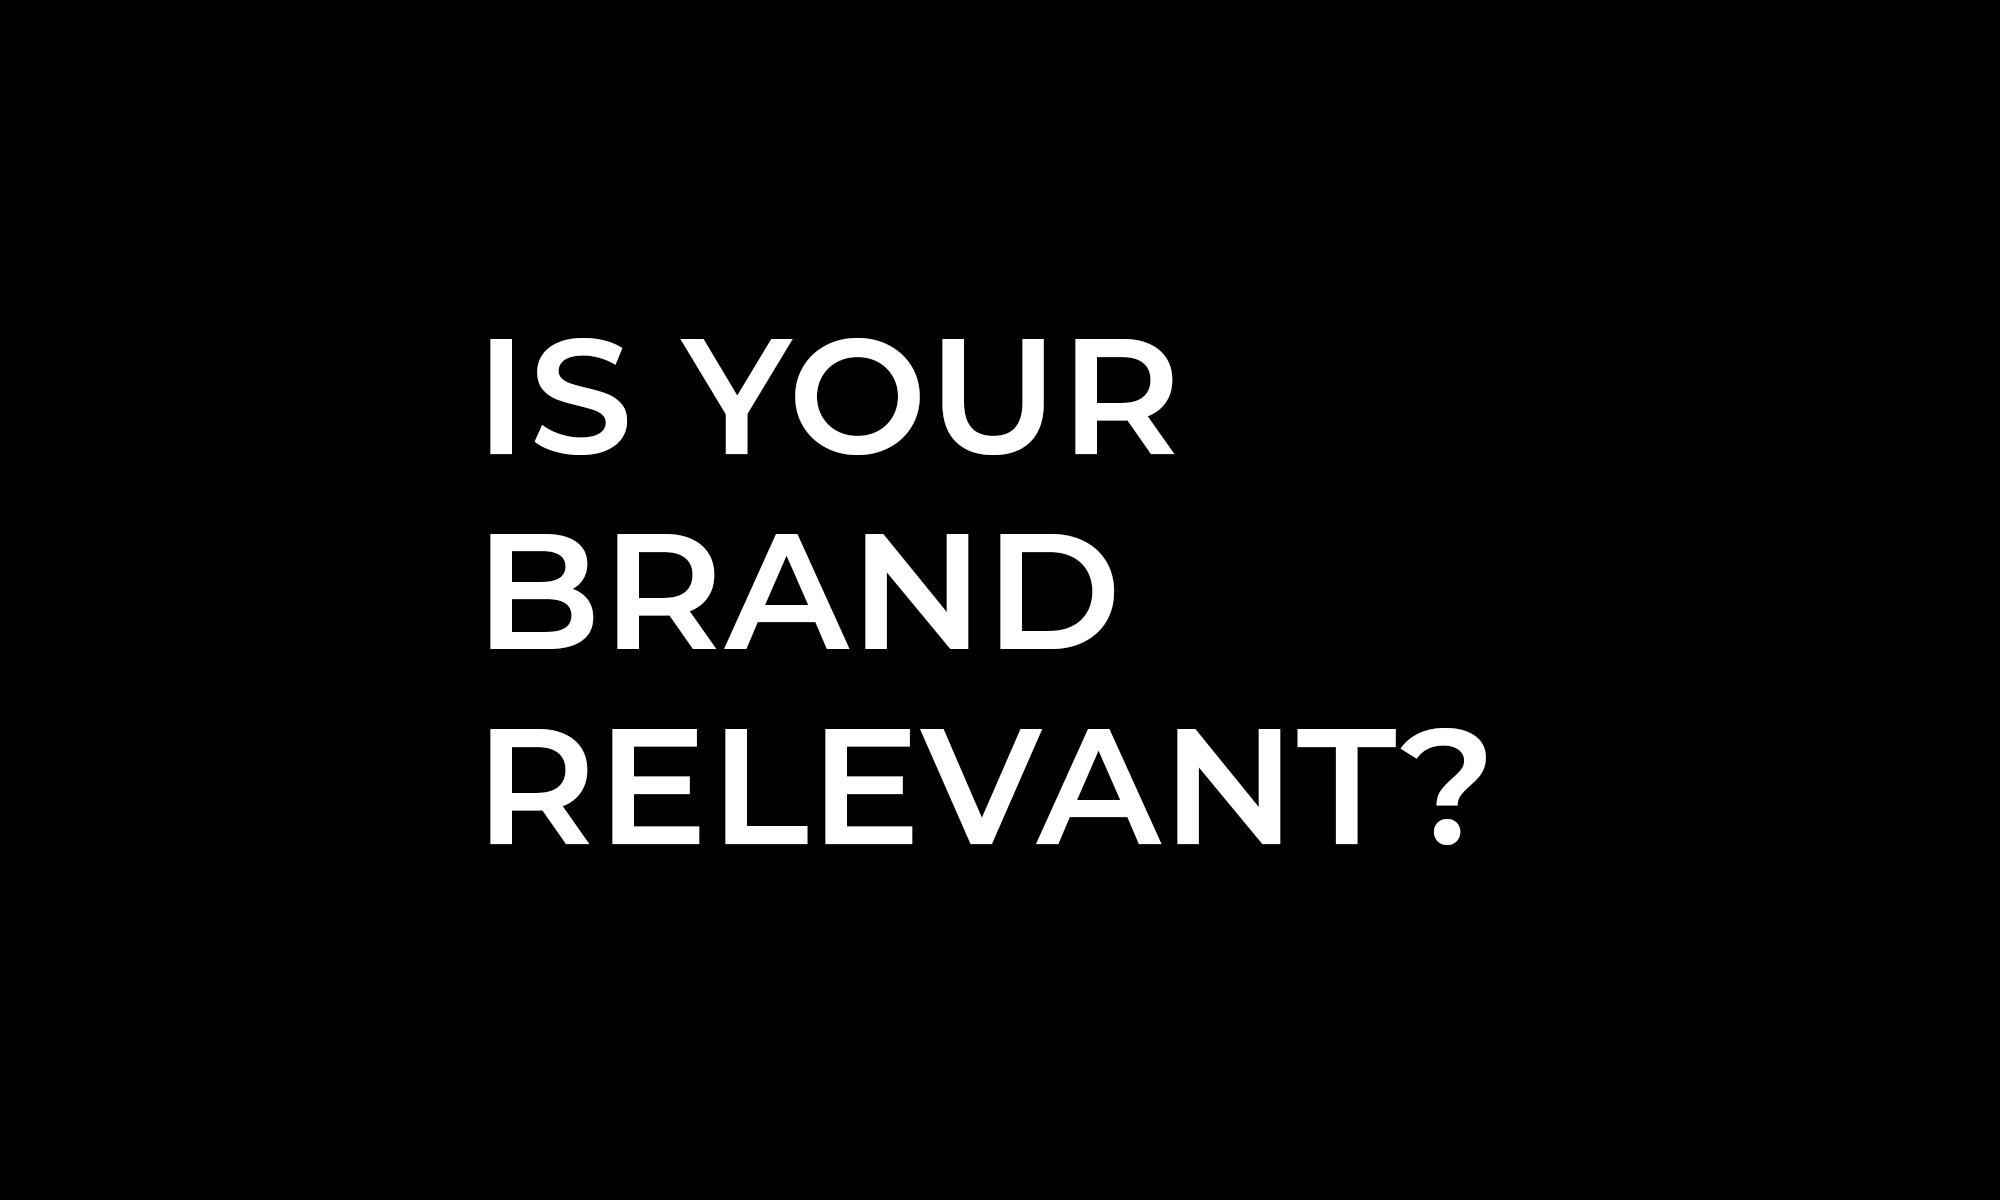 Is your brand relevant?